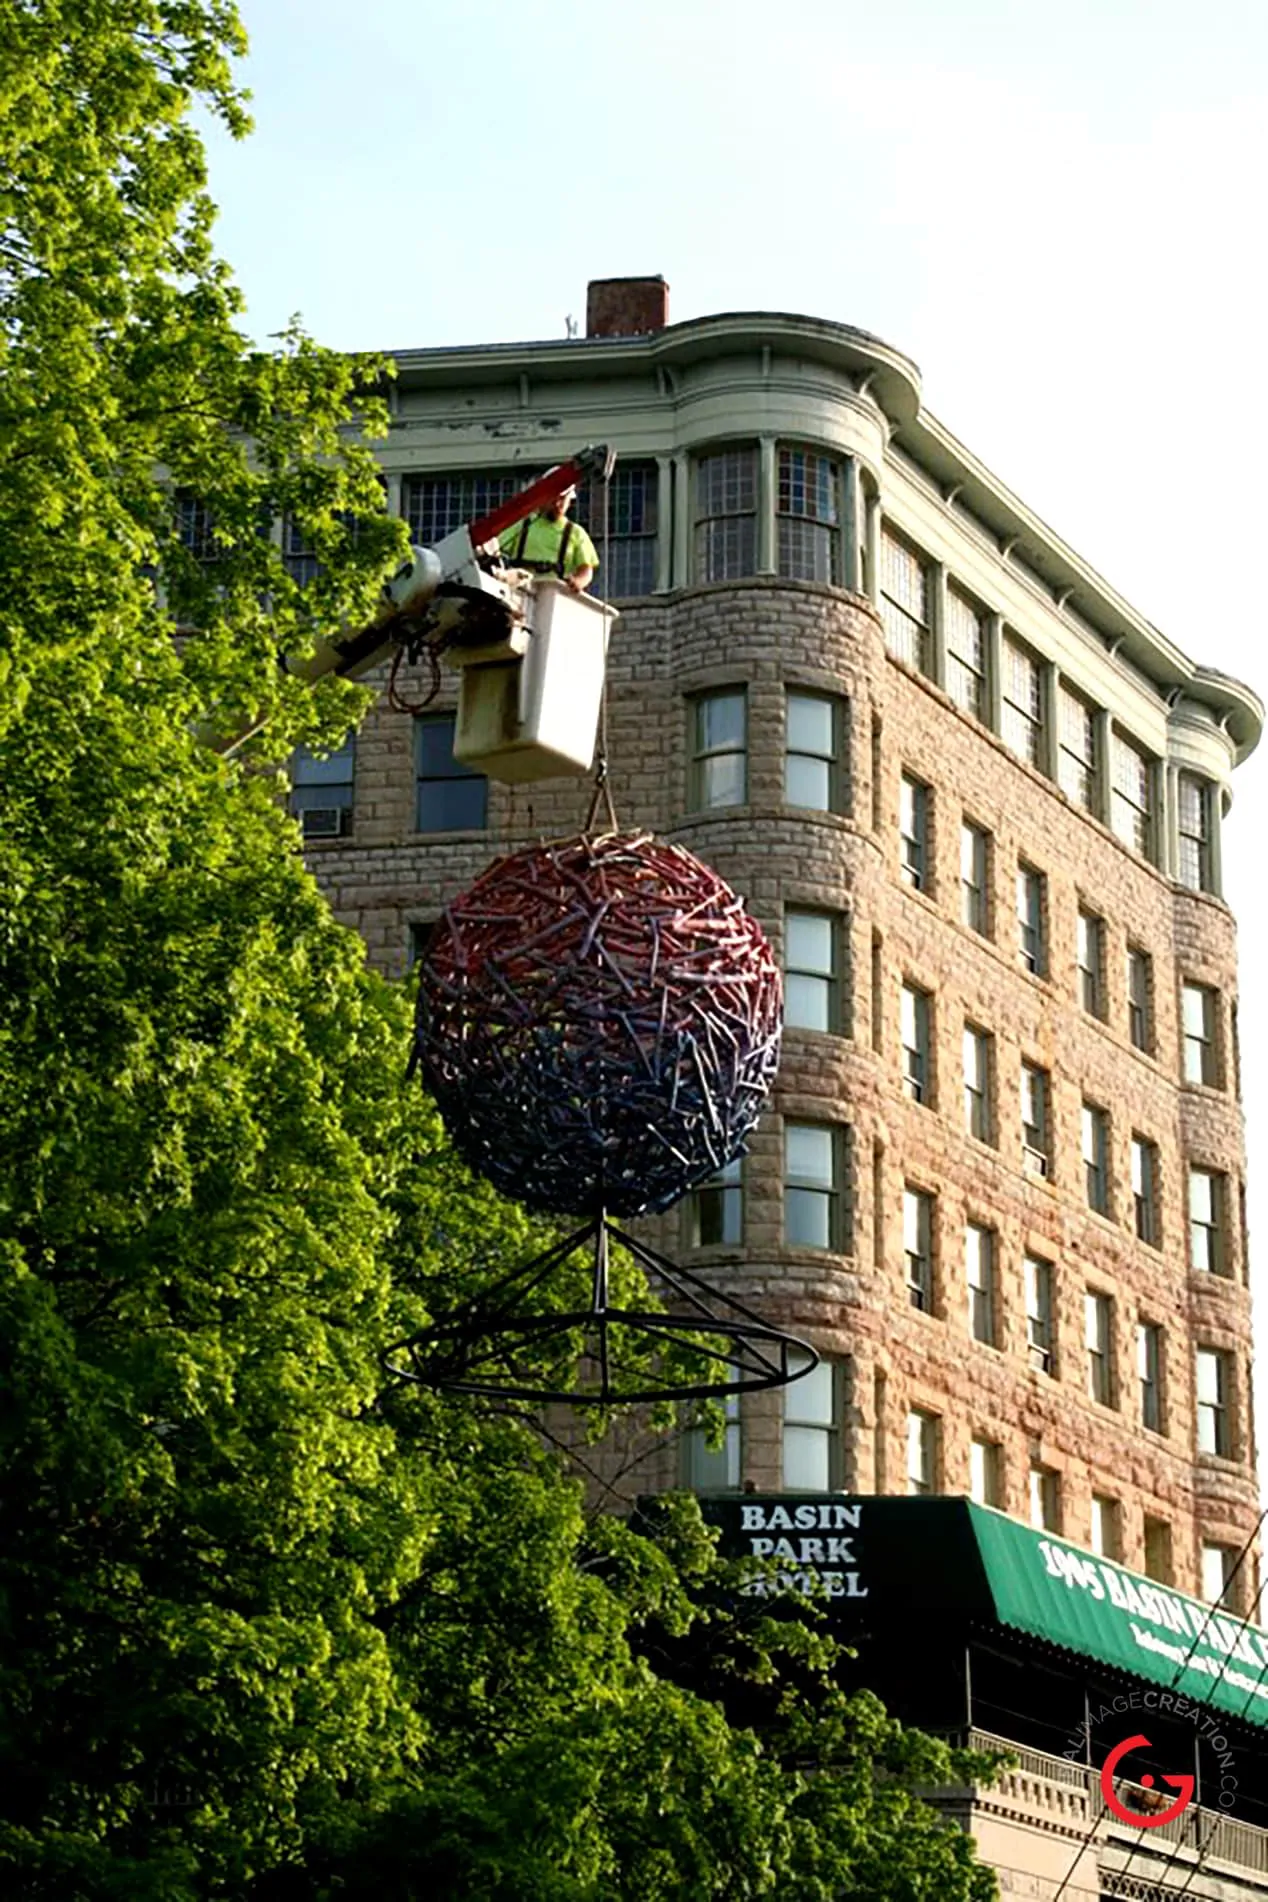 The Sphere Sculpture Gets Hoisted Into Position in Basin Park